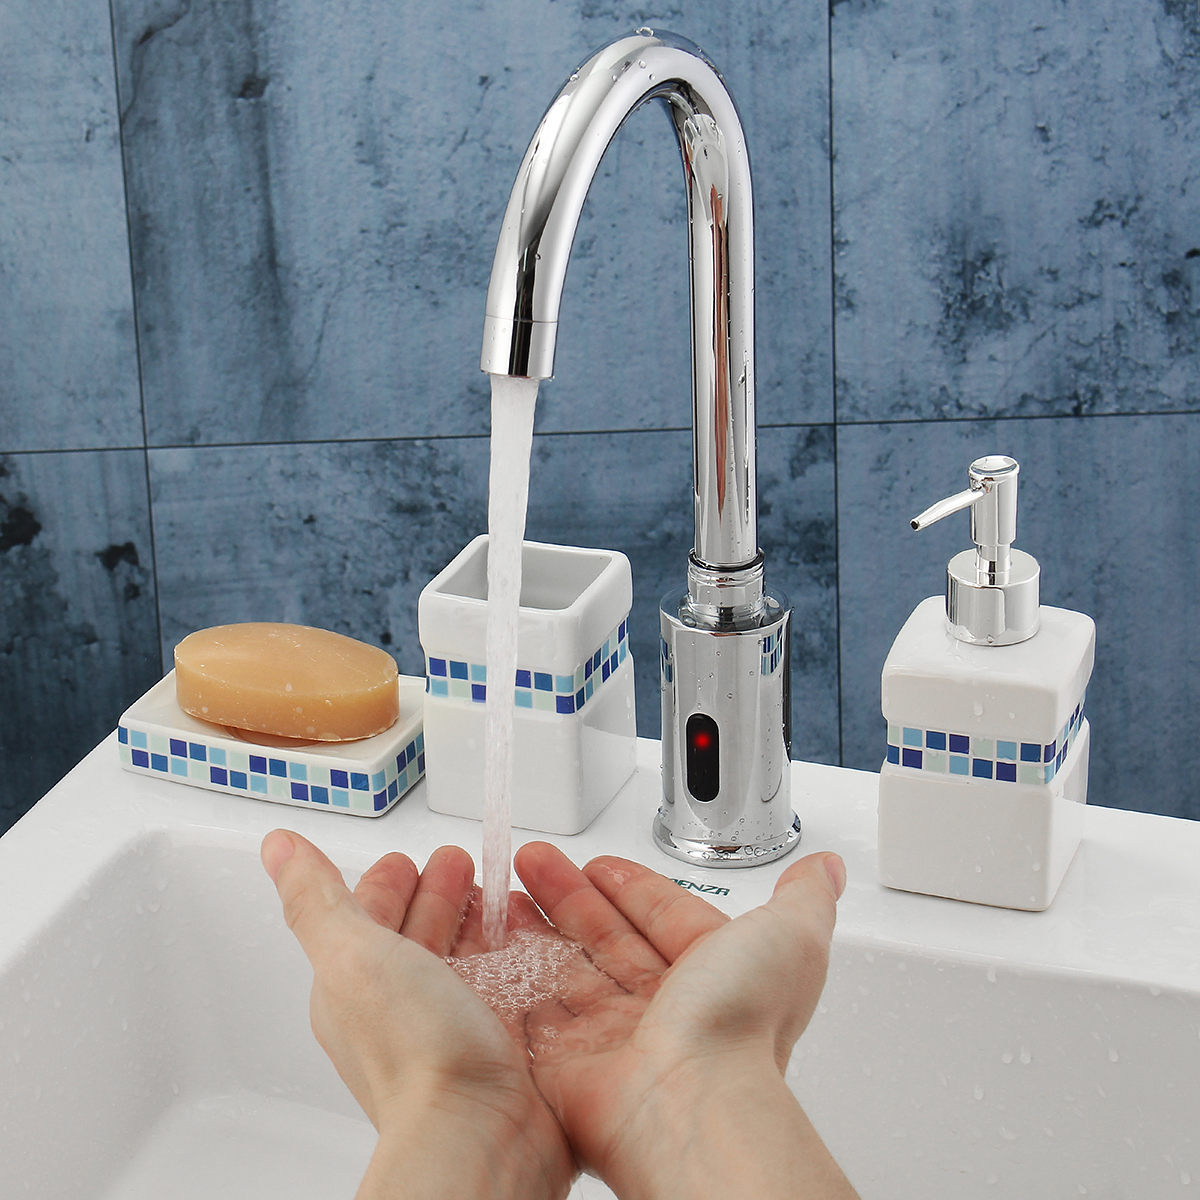 Hands-Touch-Free-Automatic-Electronic-Sensor-Control-Bathroom-Kitchen-Sink-Tap-Basin-Faucet-1386830